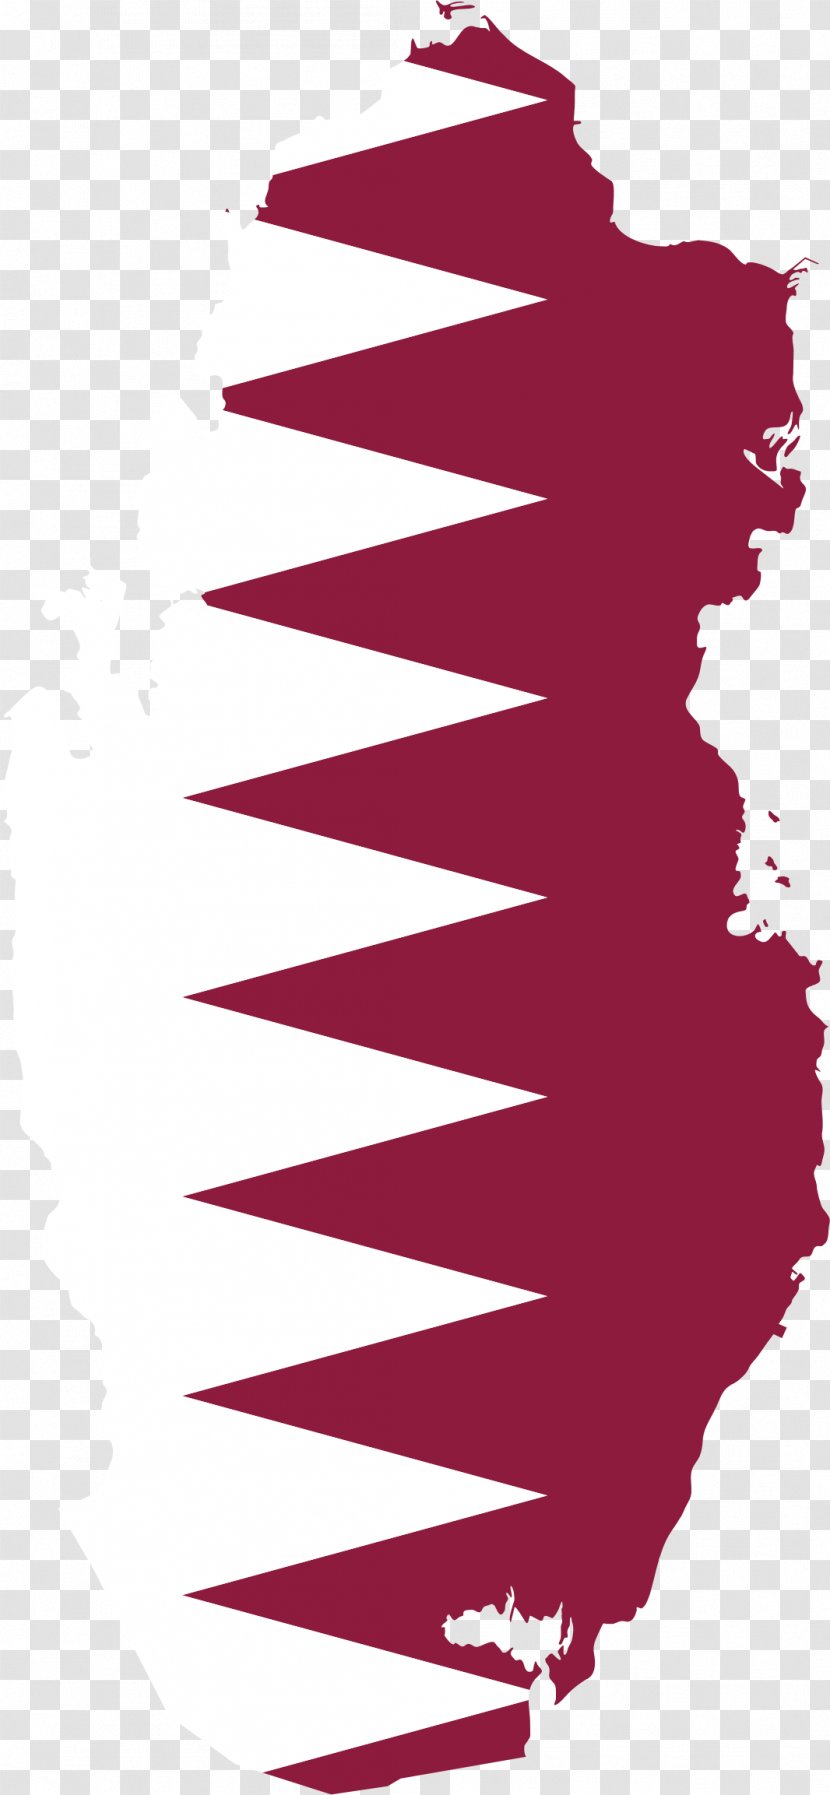 Qatar Blank Map Flag Collection - Of - BORDER FLAG Transparent PNG